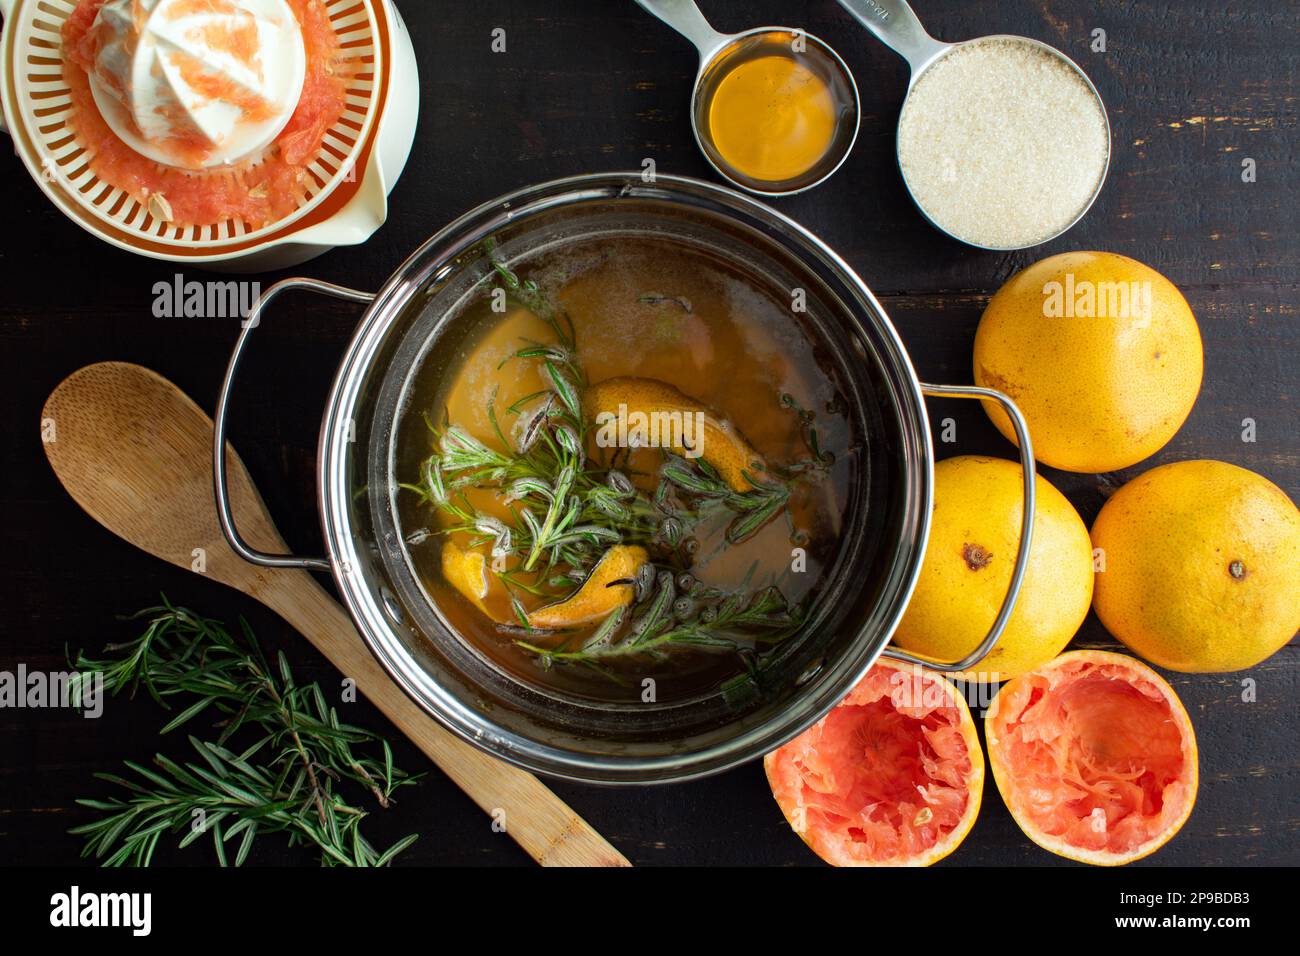 Making Rosemary-Grapefruit Simple Syrup in a Saucepan: Infused simple syrup surrounded by red grapefruit and other ingredients Stock Photo